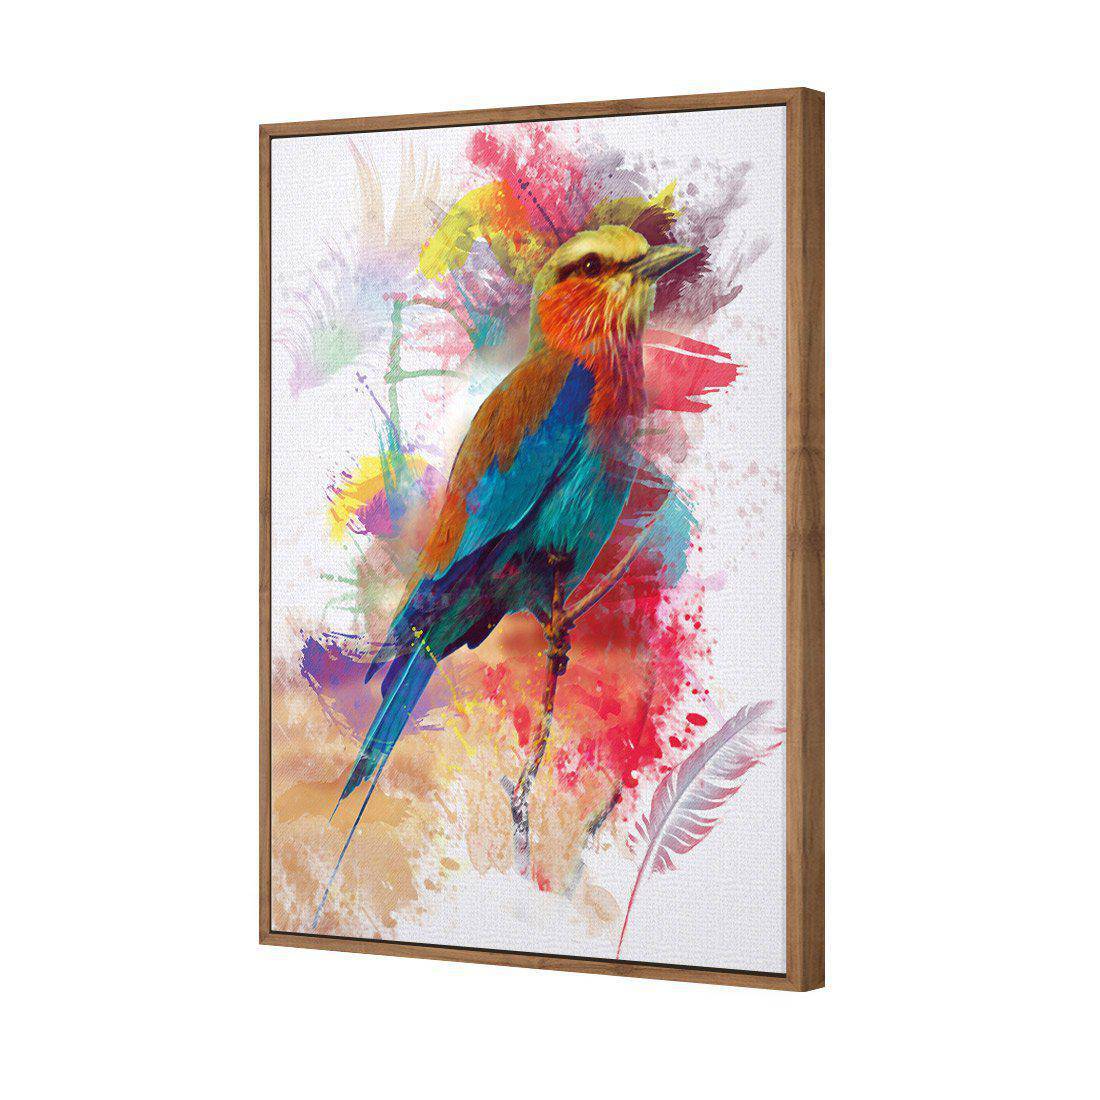 Painted Bird And Feathers Canvas Art-Canvas-Wall Art Designs-45x30cm-Canvas - Natural Frame-Wall Art Designs